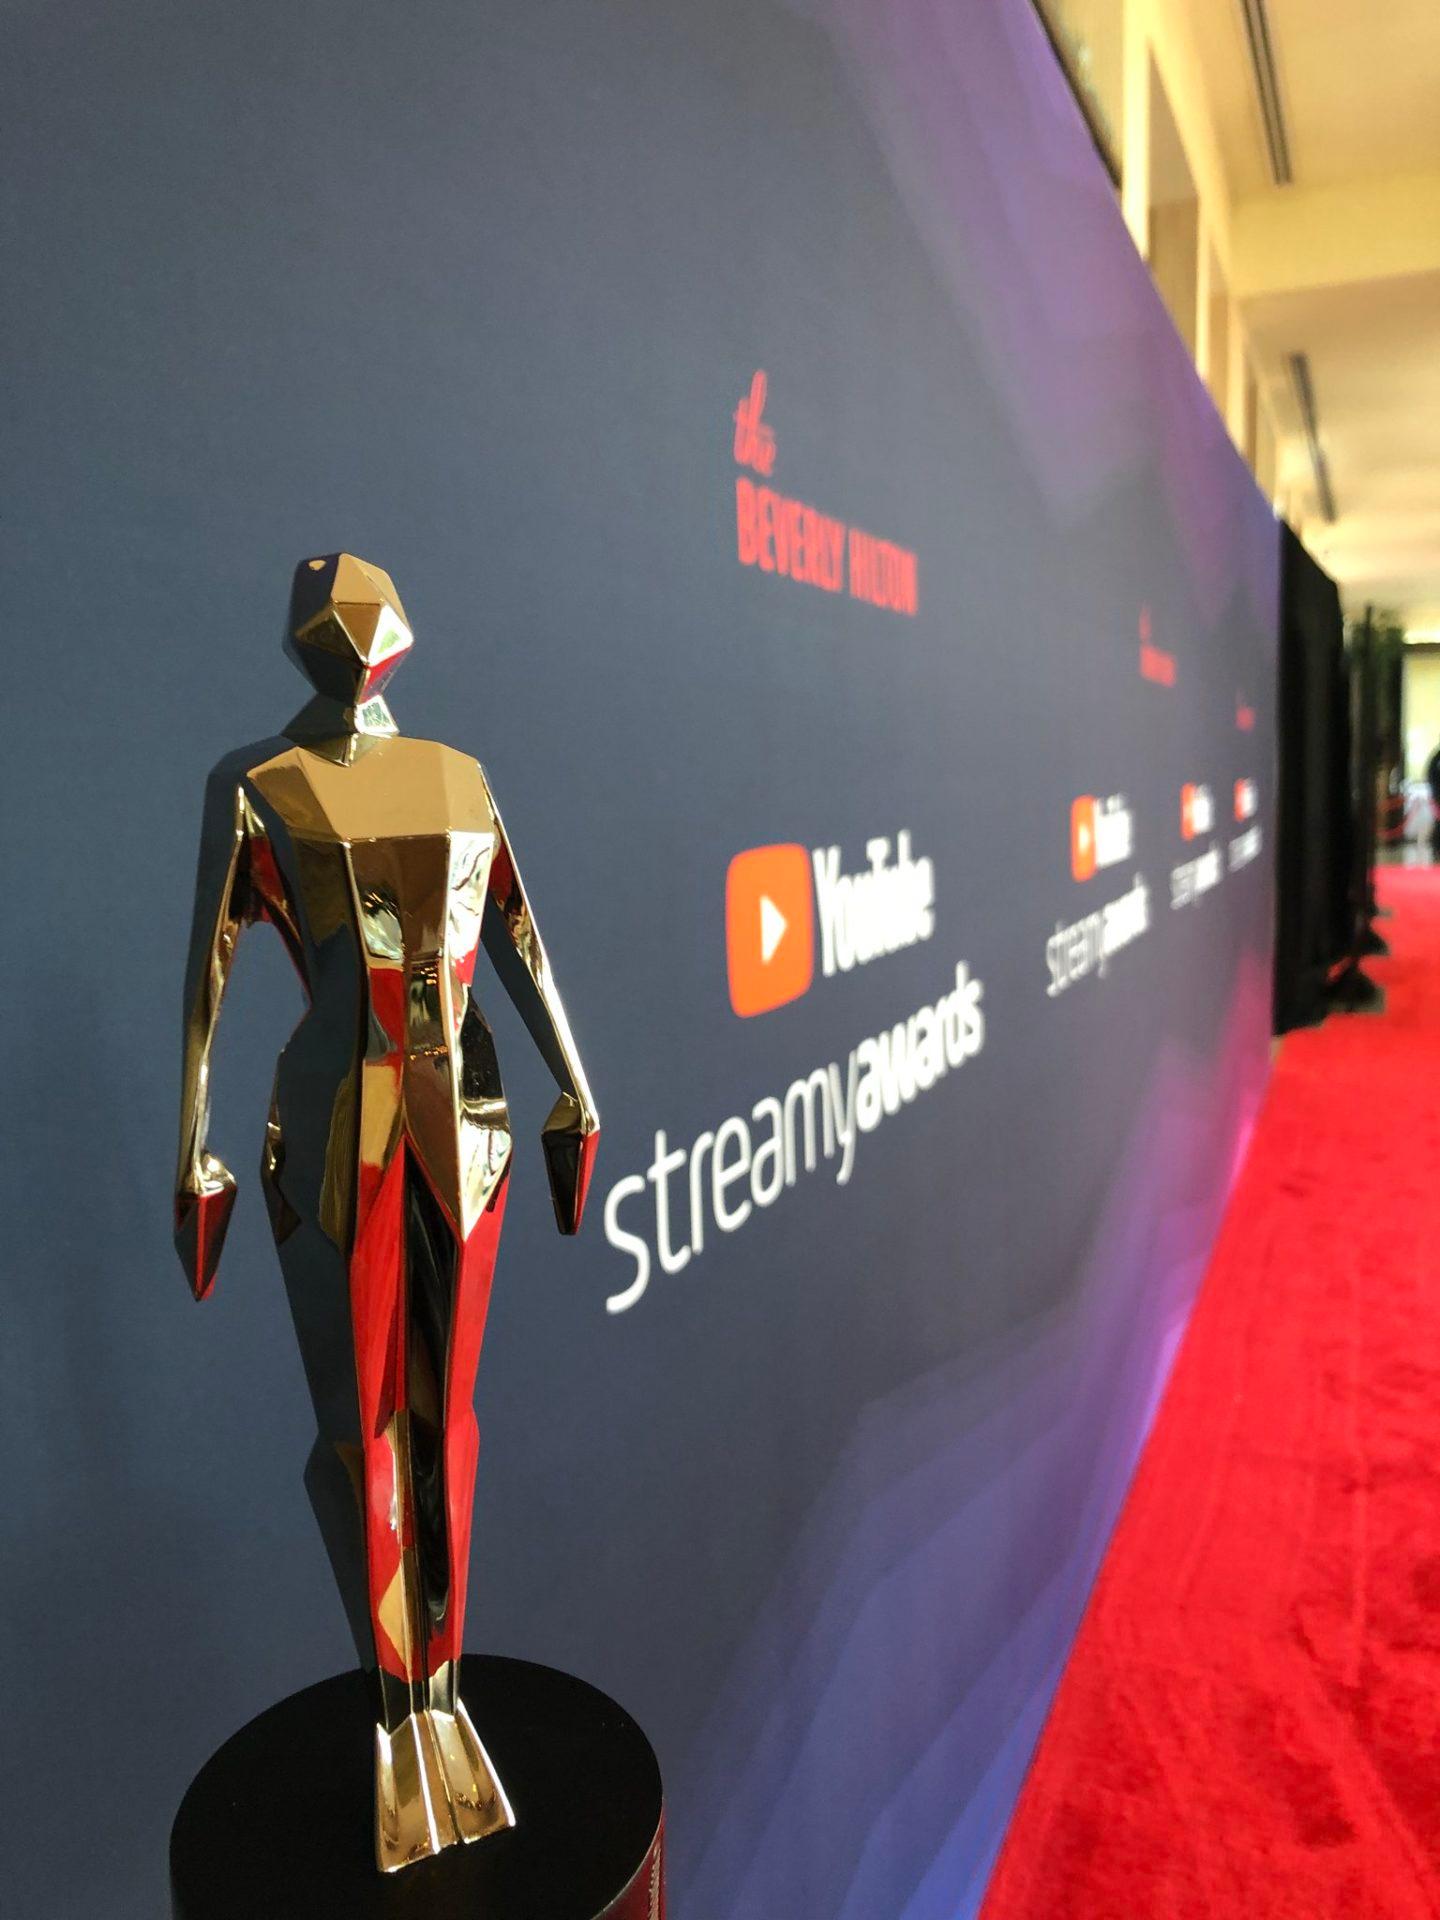 A photo of a Streamy Award trophy on the red carpet.